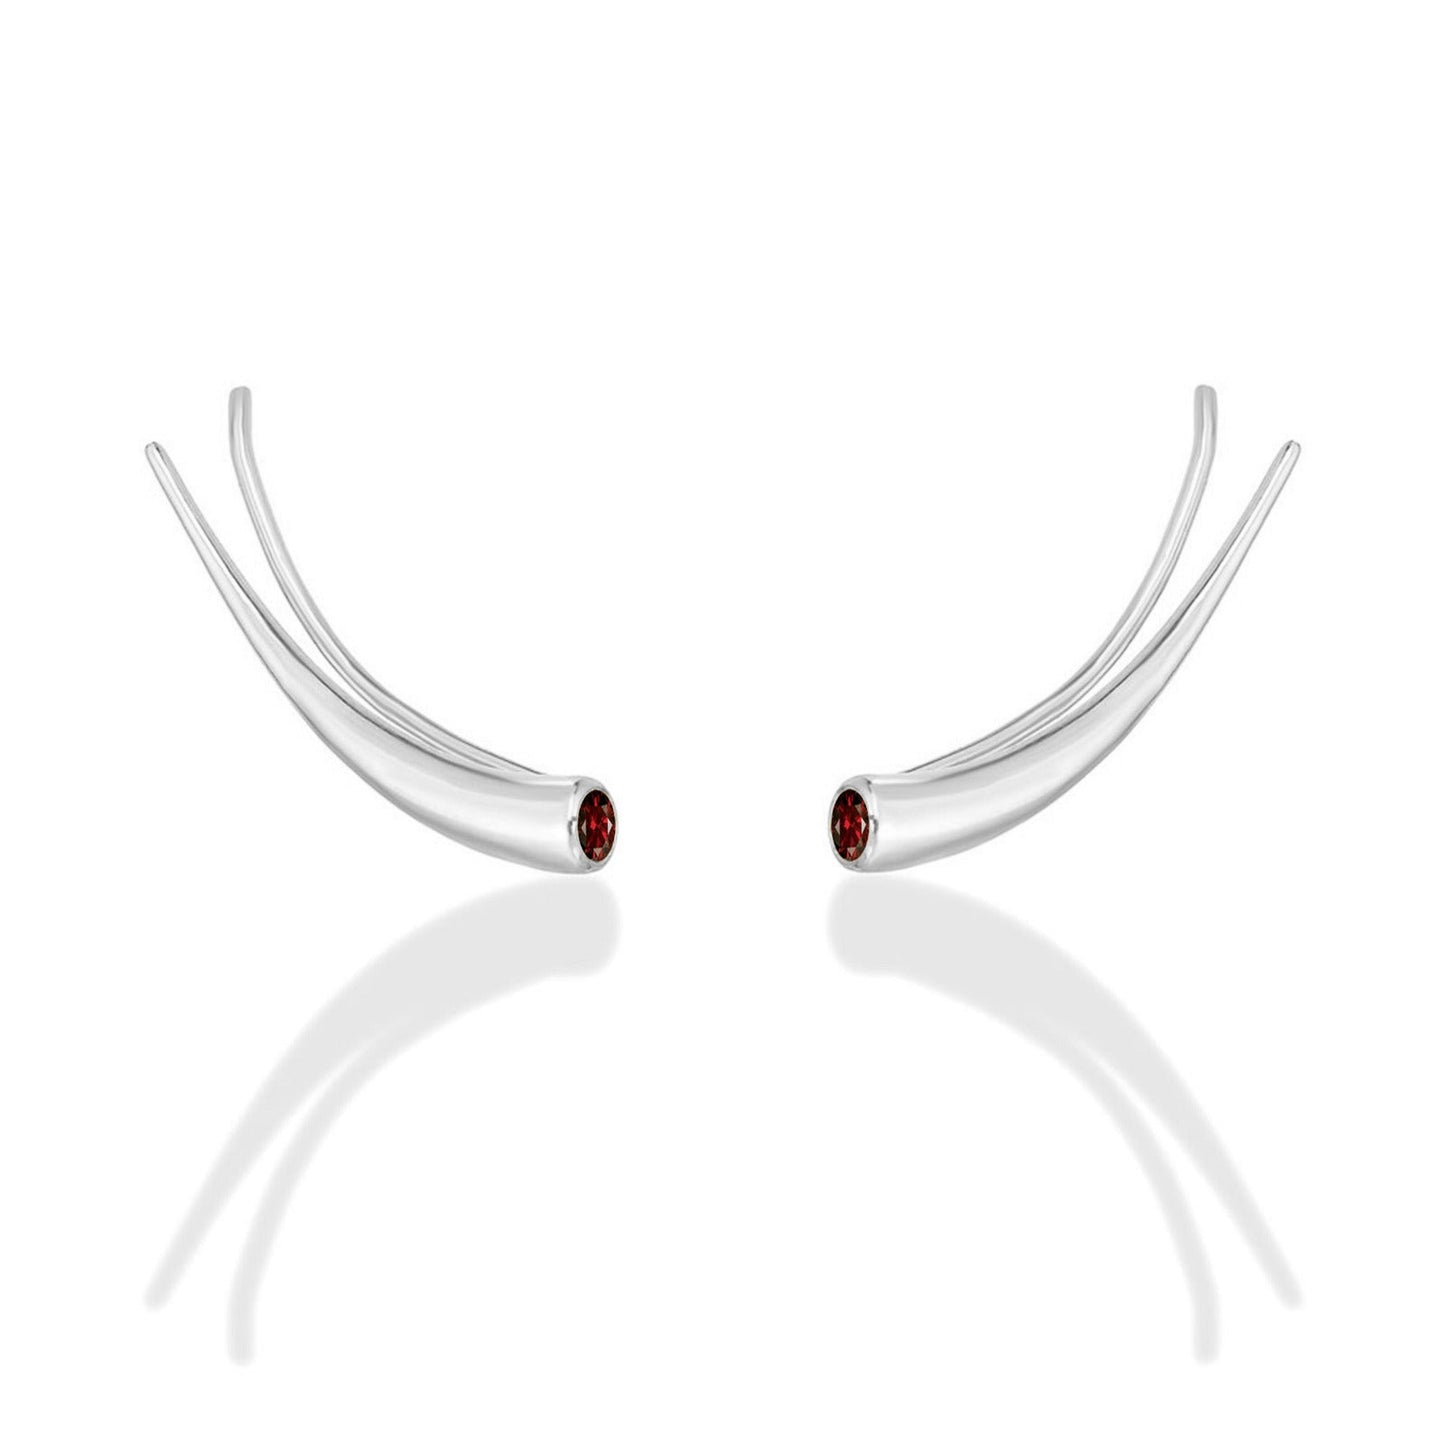 14k white gold Curved Quill Climber Earrings with garnet